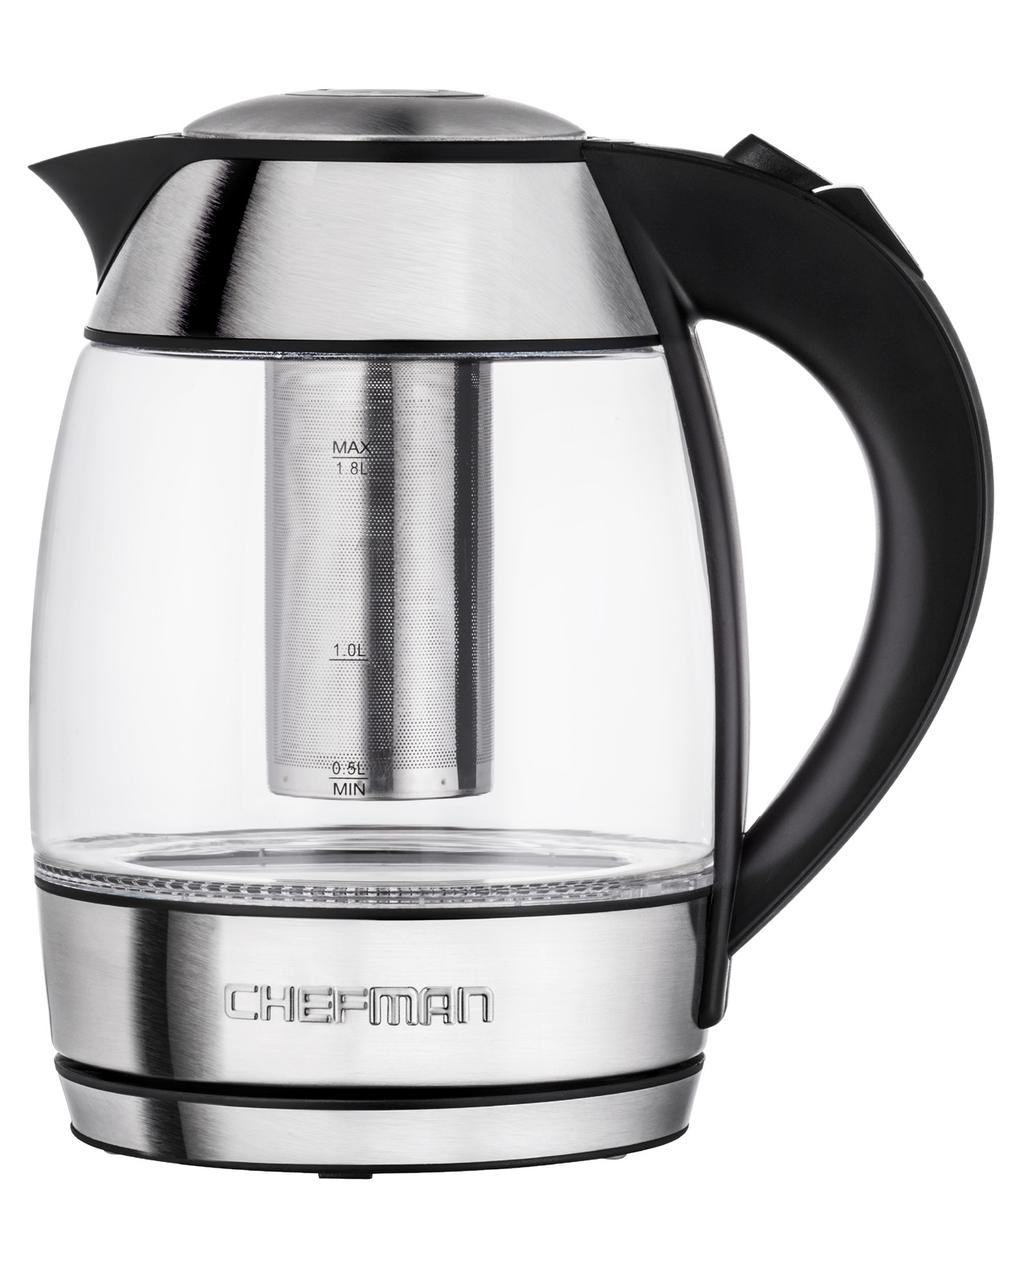 Features 1 8 7 2 6 5 2 4 3 1. Lid 2. Automatic shut-off for added safety, the kettle automatically shuts itself off once the water has reached a boil 3.